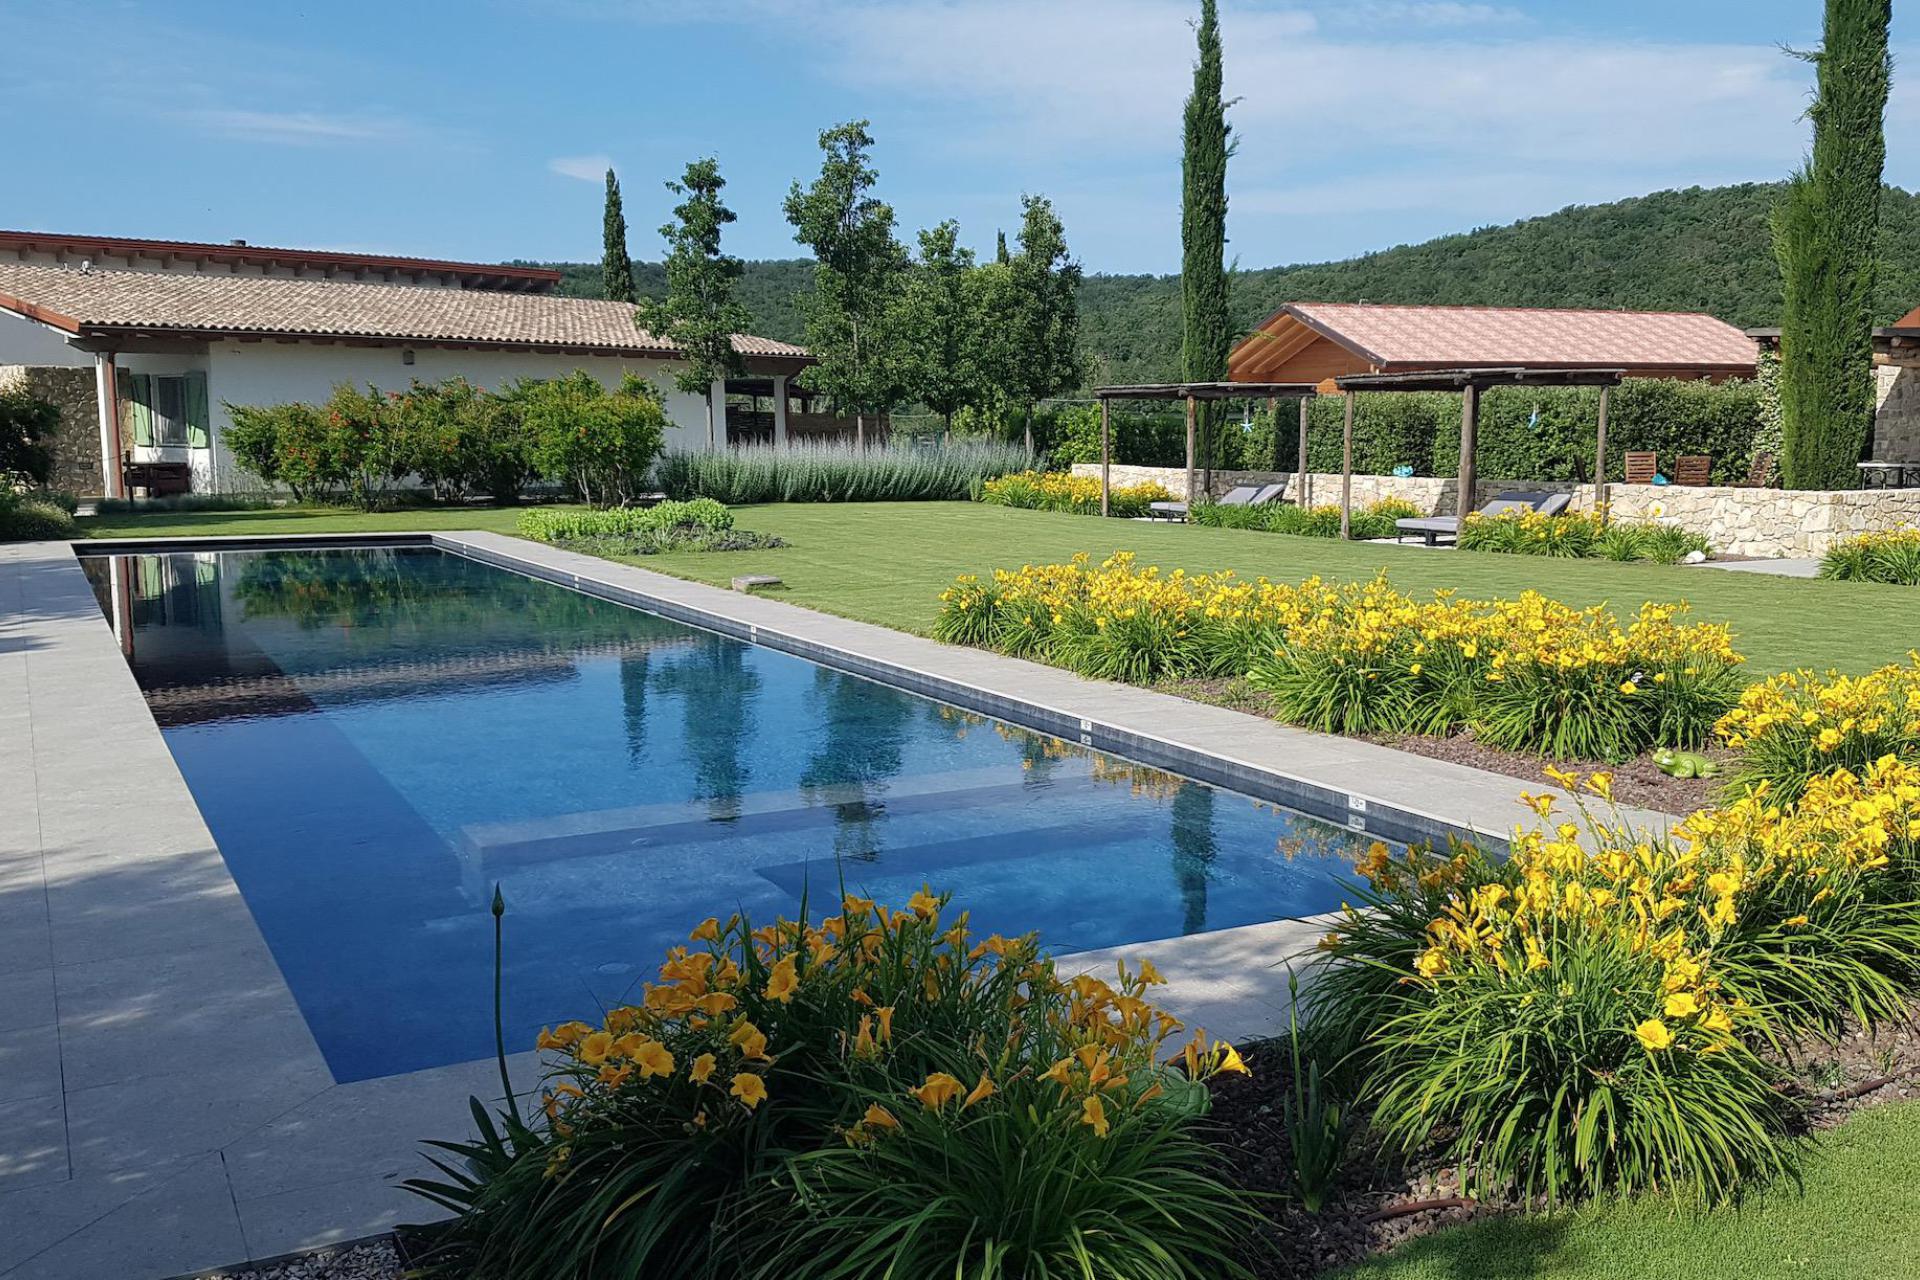 Agriturismo with breakfast, not far from the beach in Tuscany